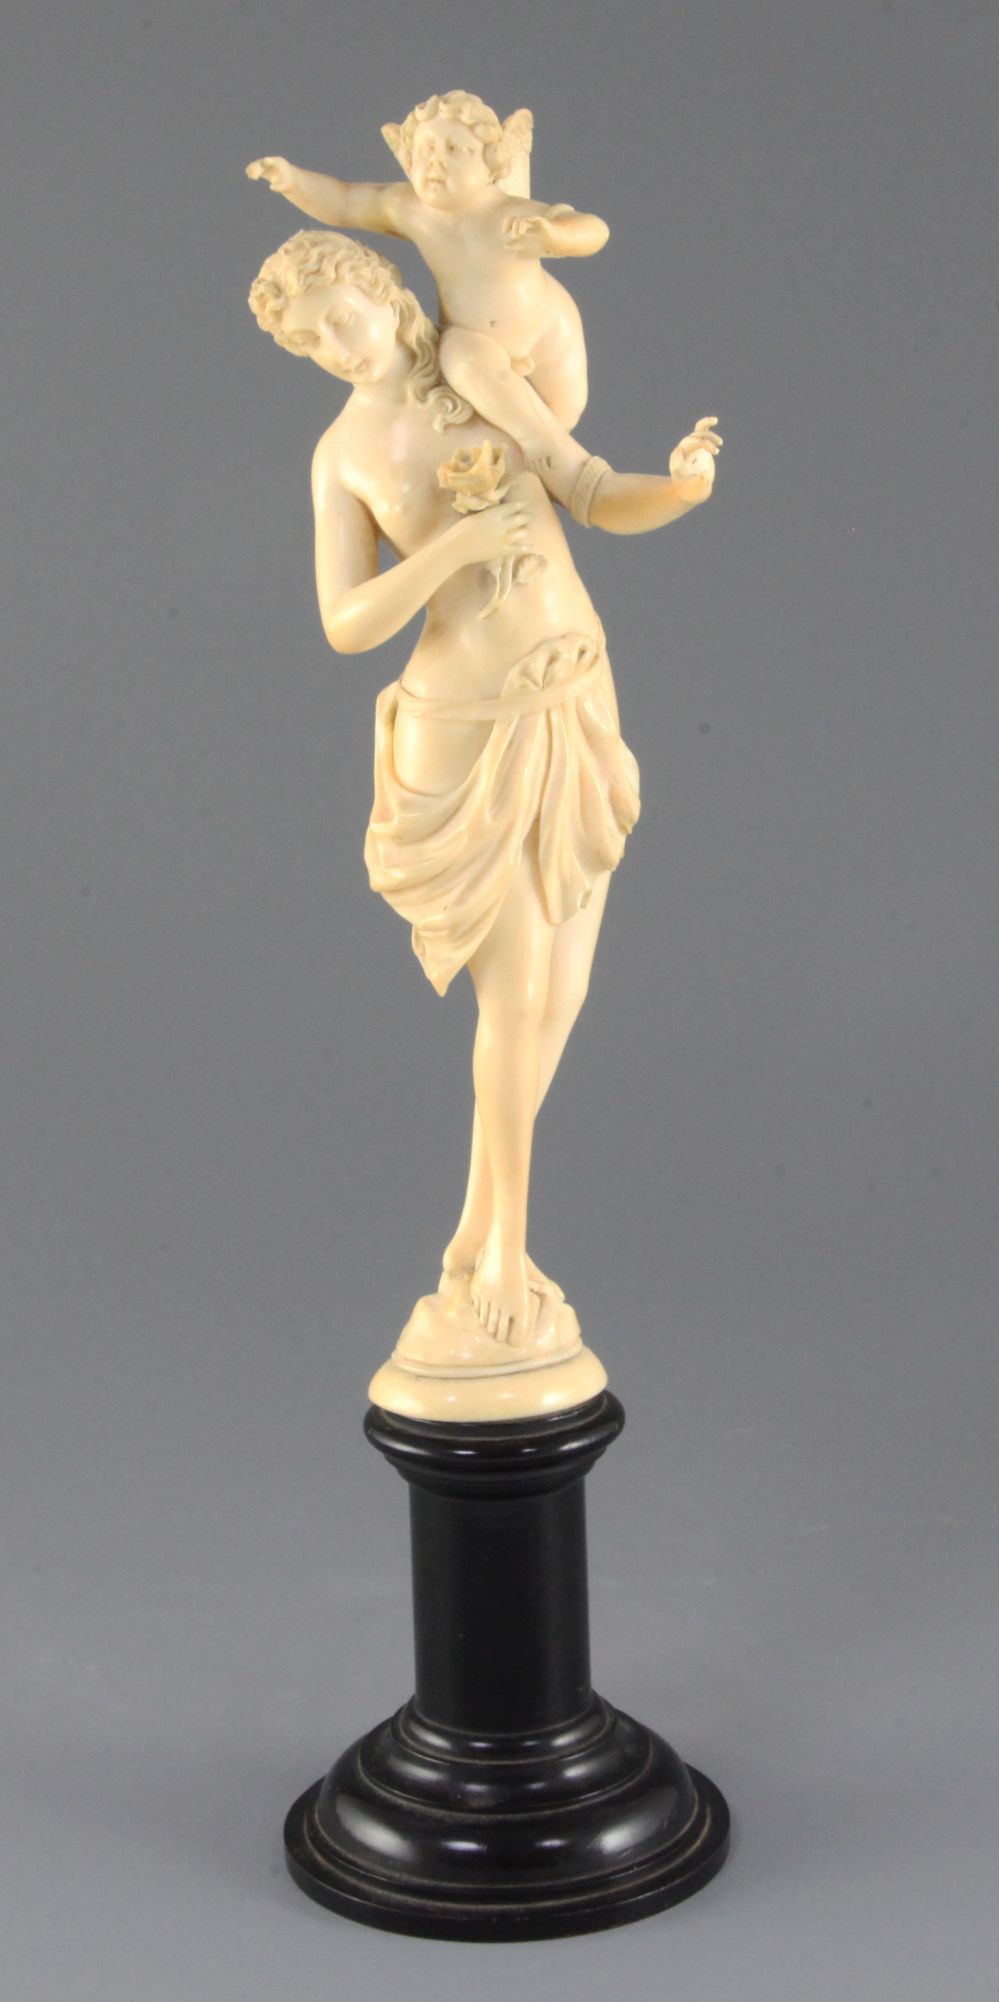 A 19th century French Dieppe ivory carving of Venus and Cupid, on an ebonised socle, Overall H.13.